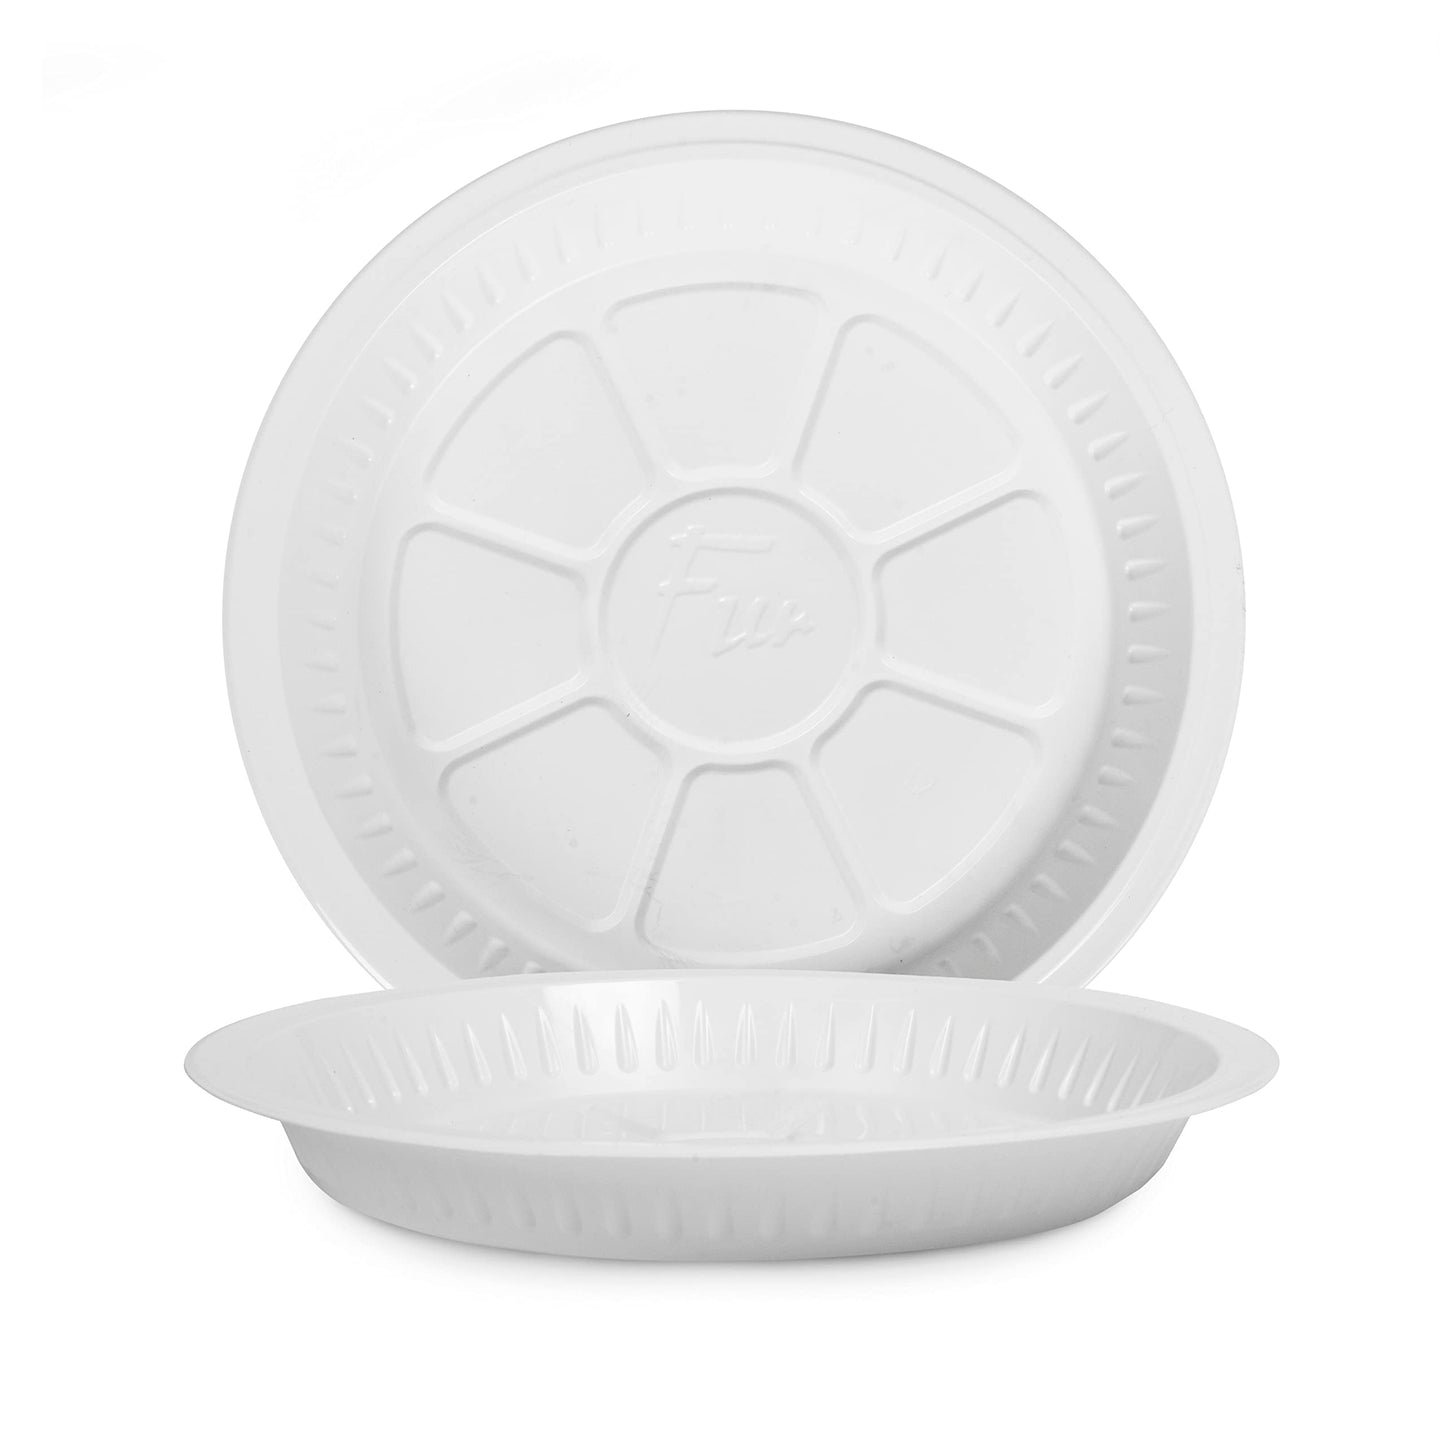 Fun Biodegradable Plate 22cm Eco-Friendly Disposable Dinnerware White Plate for Party, Camping, Picnic Biodegradable Plates (Pack of 12)